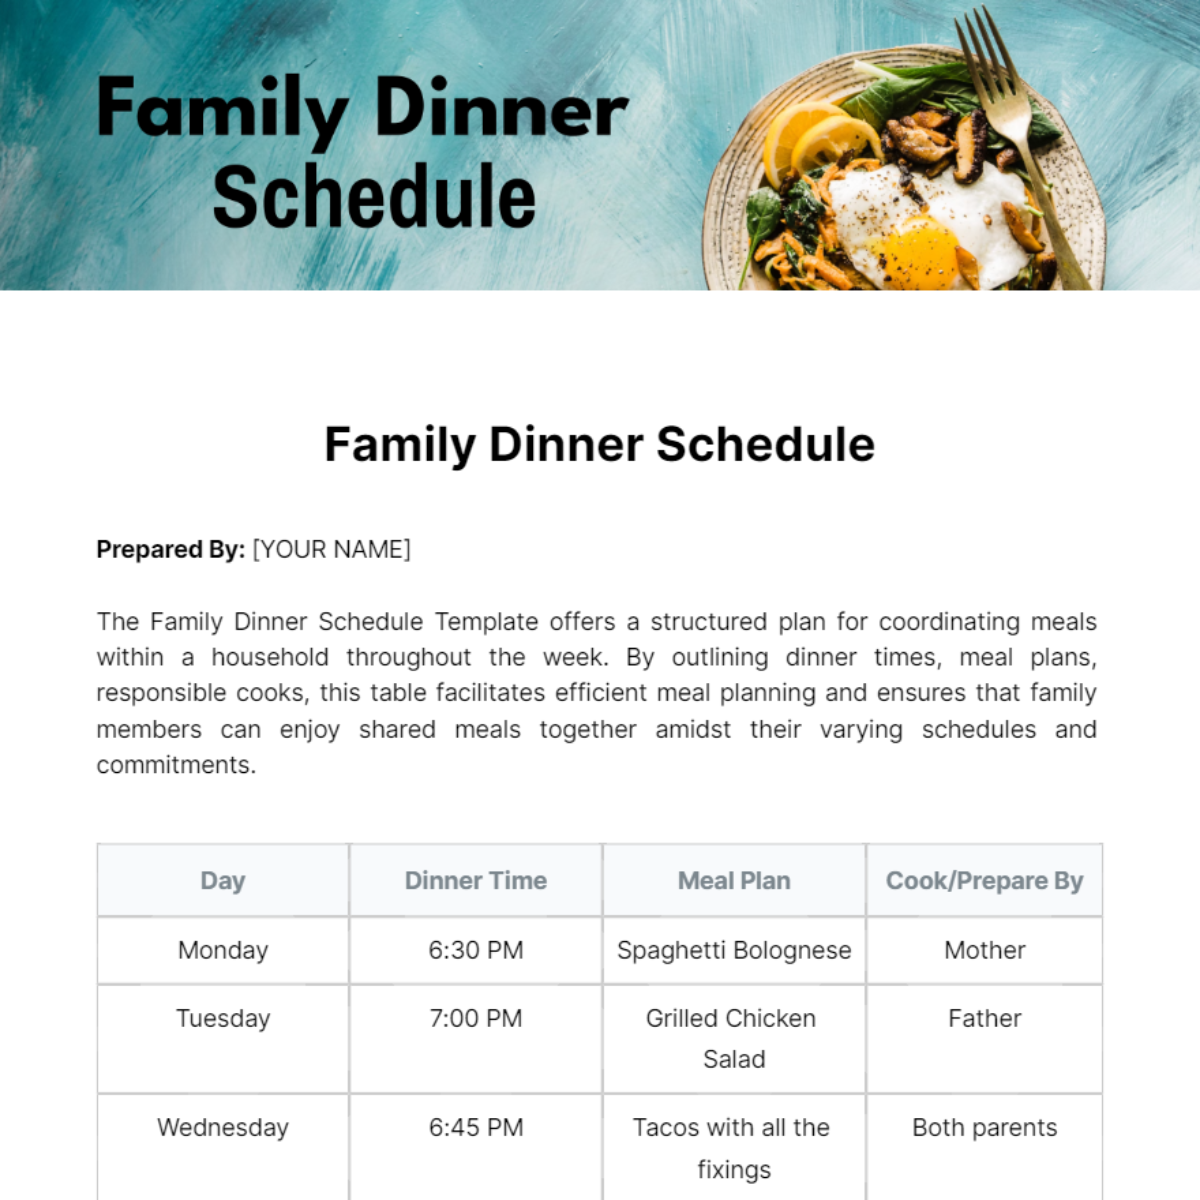 Family Dinner Schedule Template